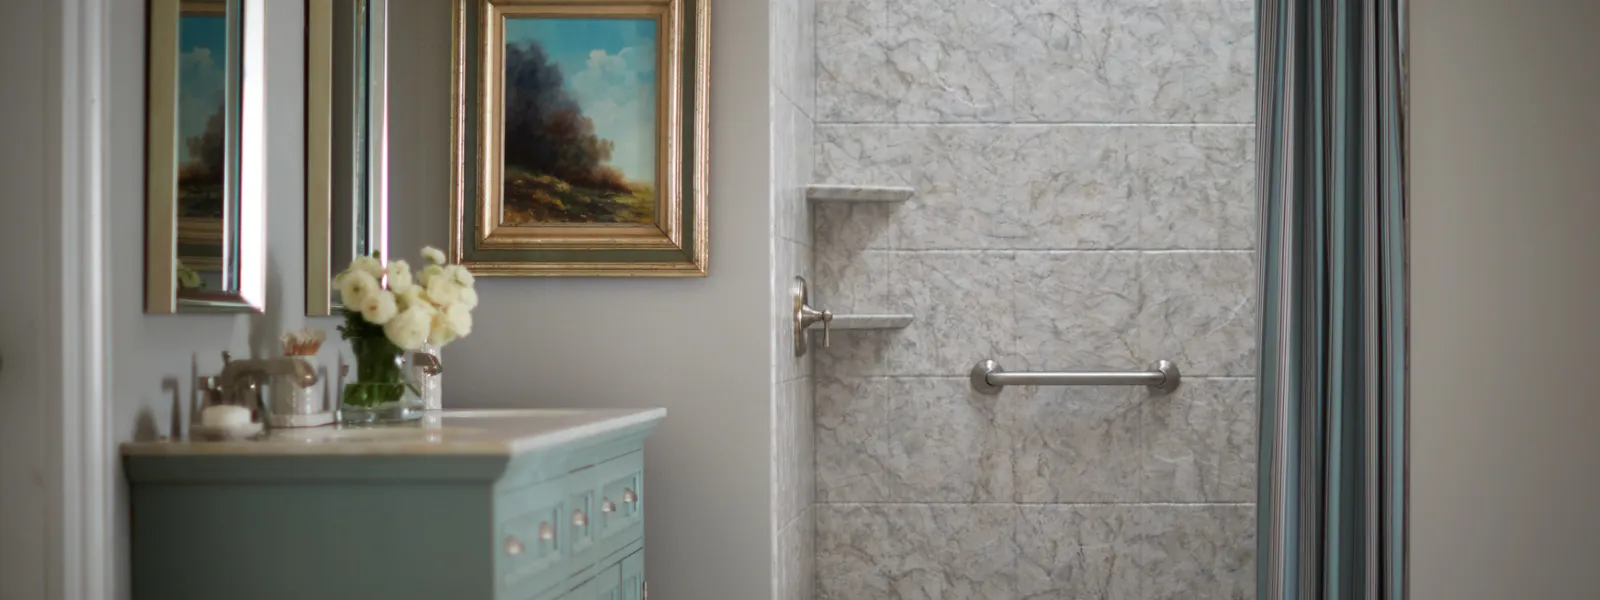 Skeptical of solid surface acrylic bathrooms? Get the facts from Expo Home Improvement.